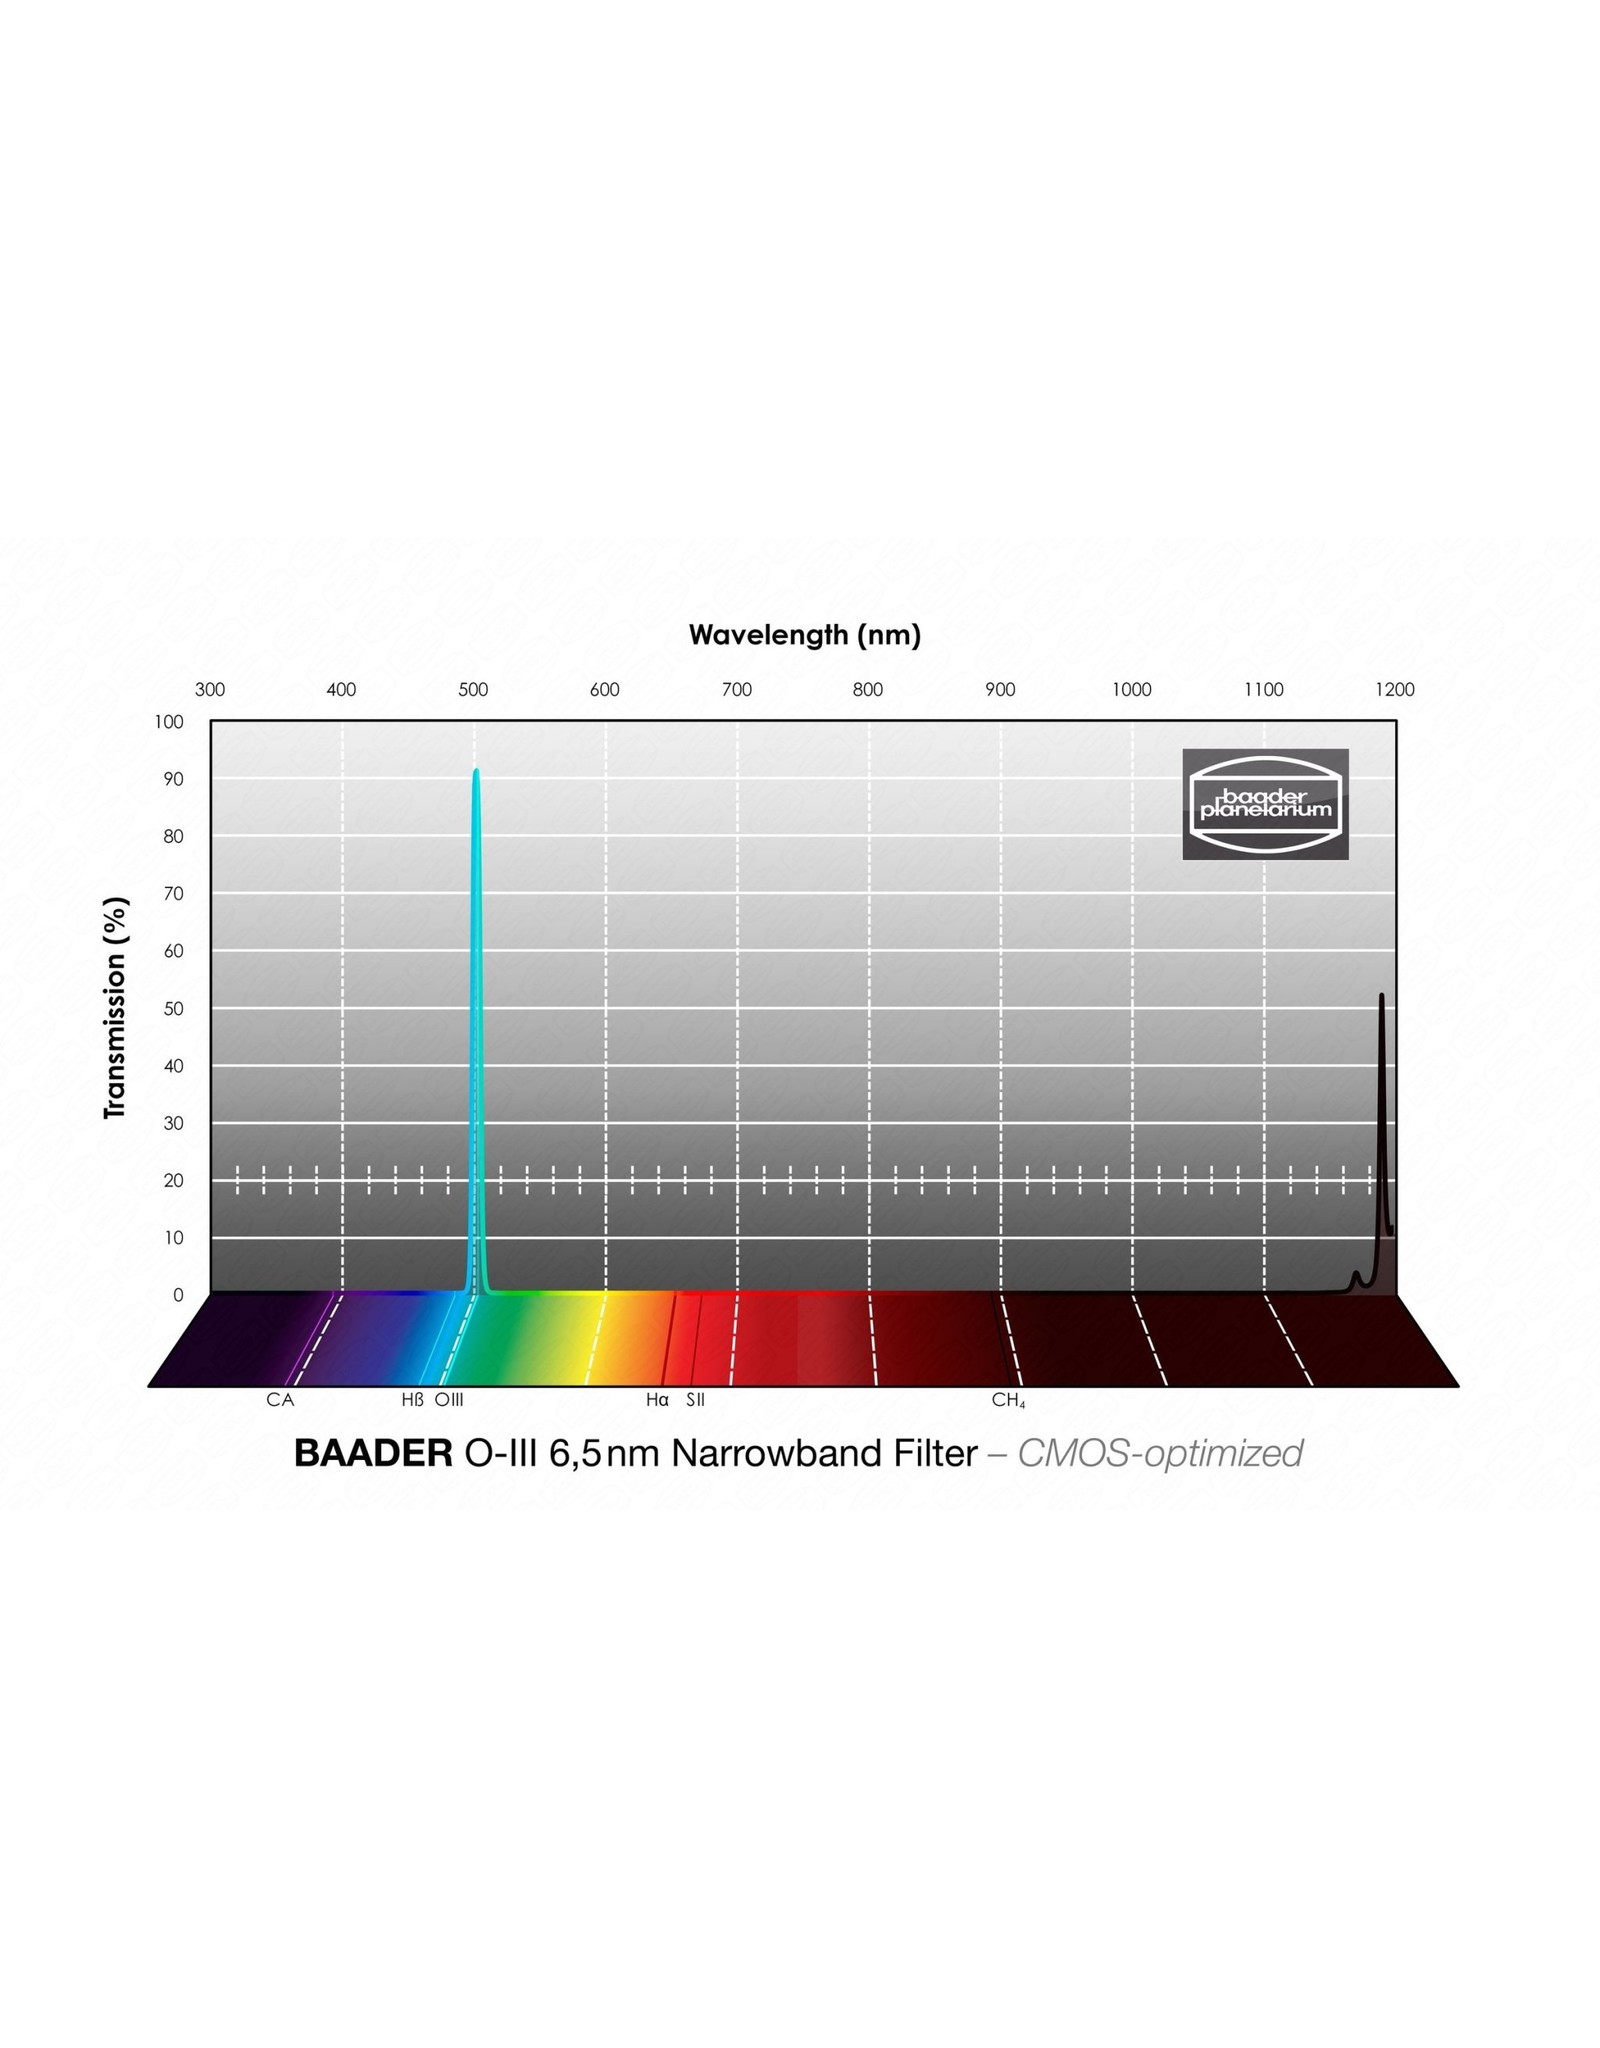 Baader Planetarium Baader 6.5nm Narrowband Sulfur-II Filters – CMOS-optimized (Specify Size)